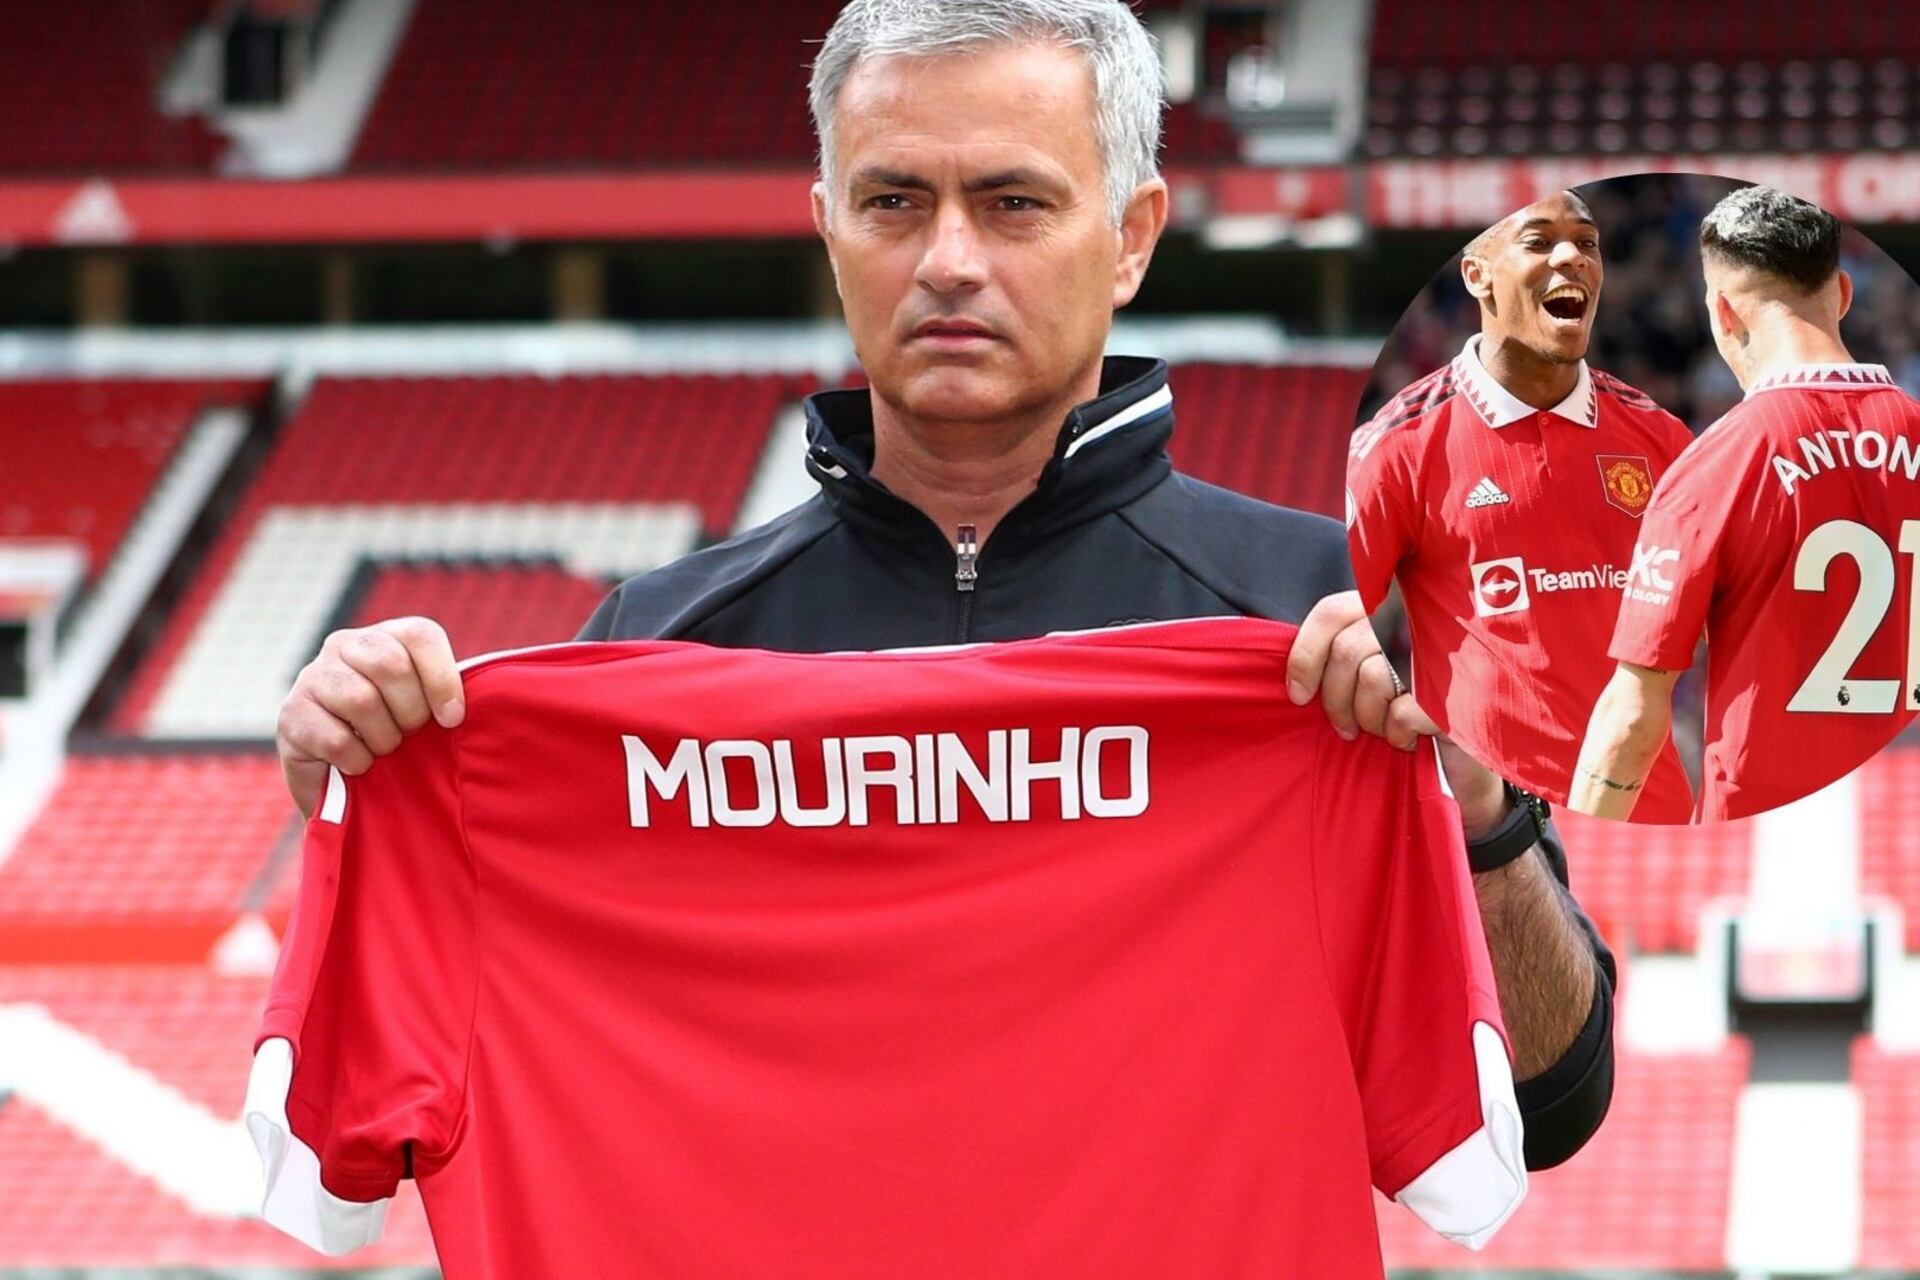 If Mourinho arrives at Man U, the first player to leave, and it's not Rashford